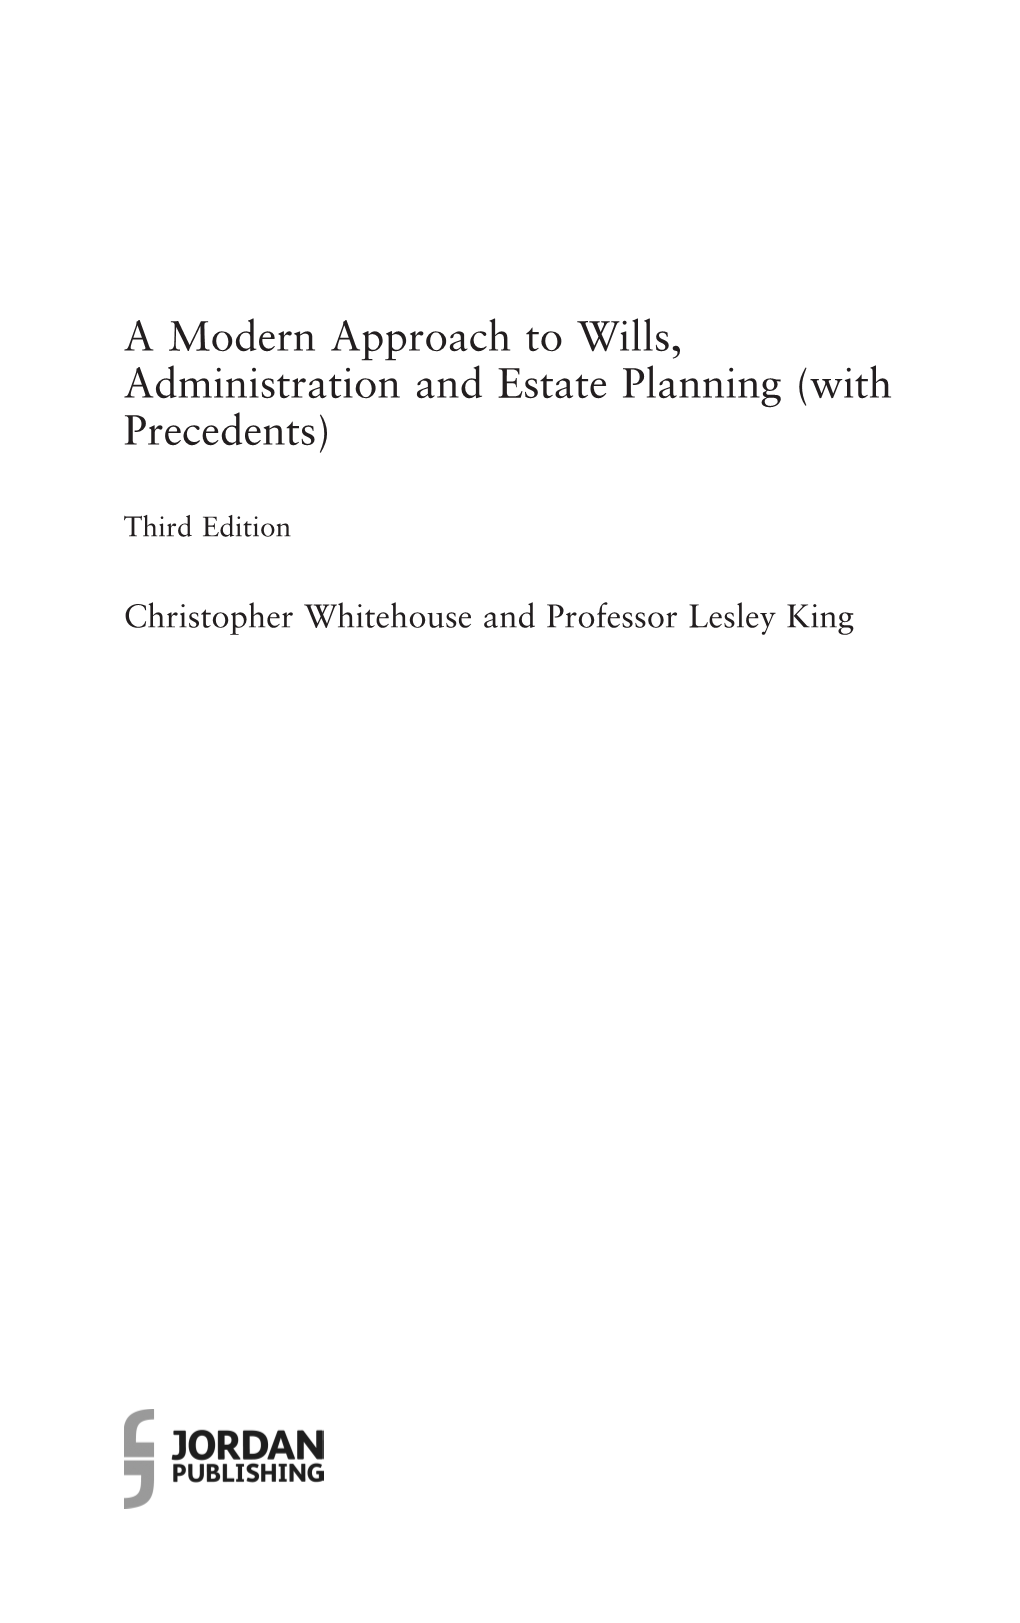 A Modern Approach to Wills, Administration and Estate Planning (With Precedents)